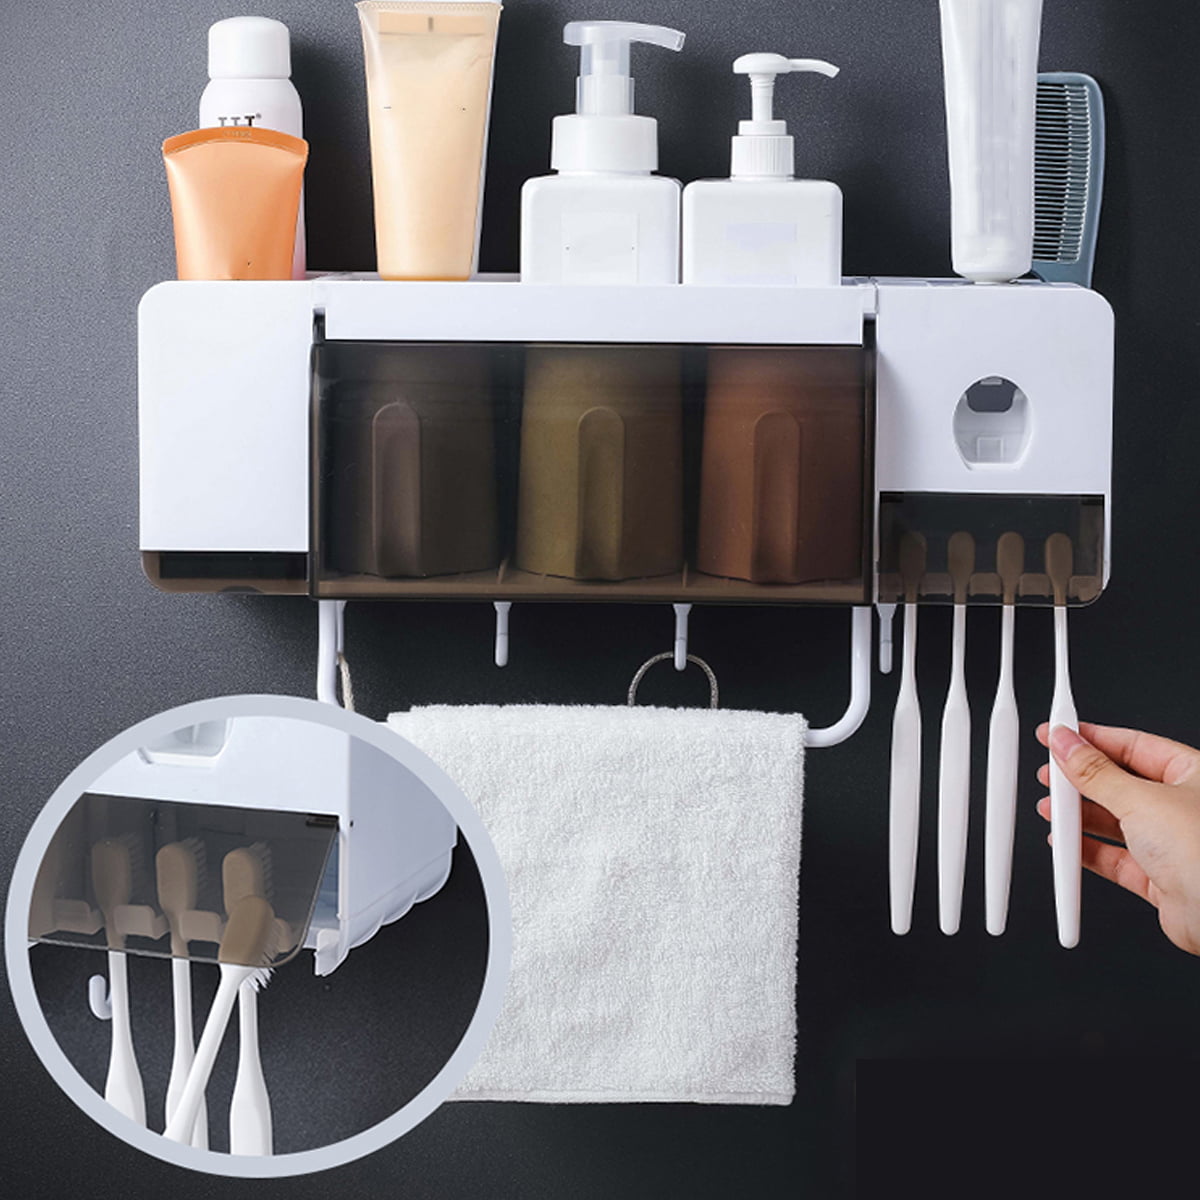 Free Drilling Toothbrush Holder Automatic Toothpaste Dispenser Set Towel Rack 